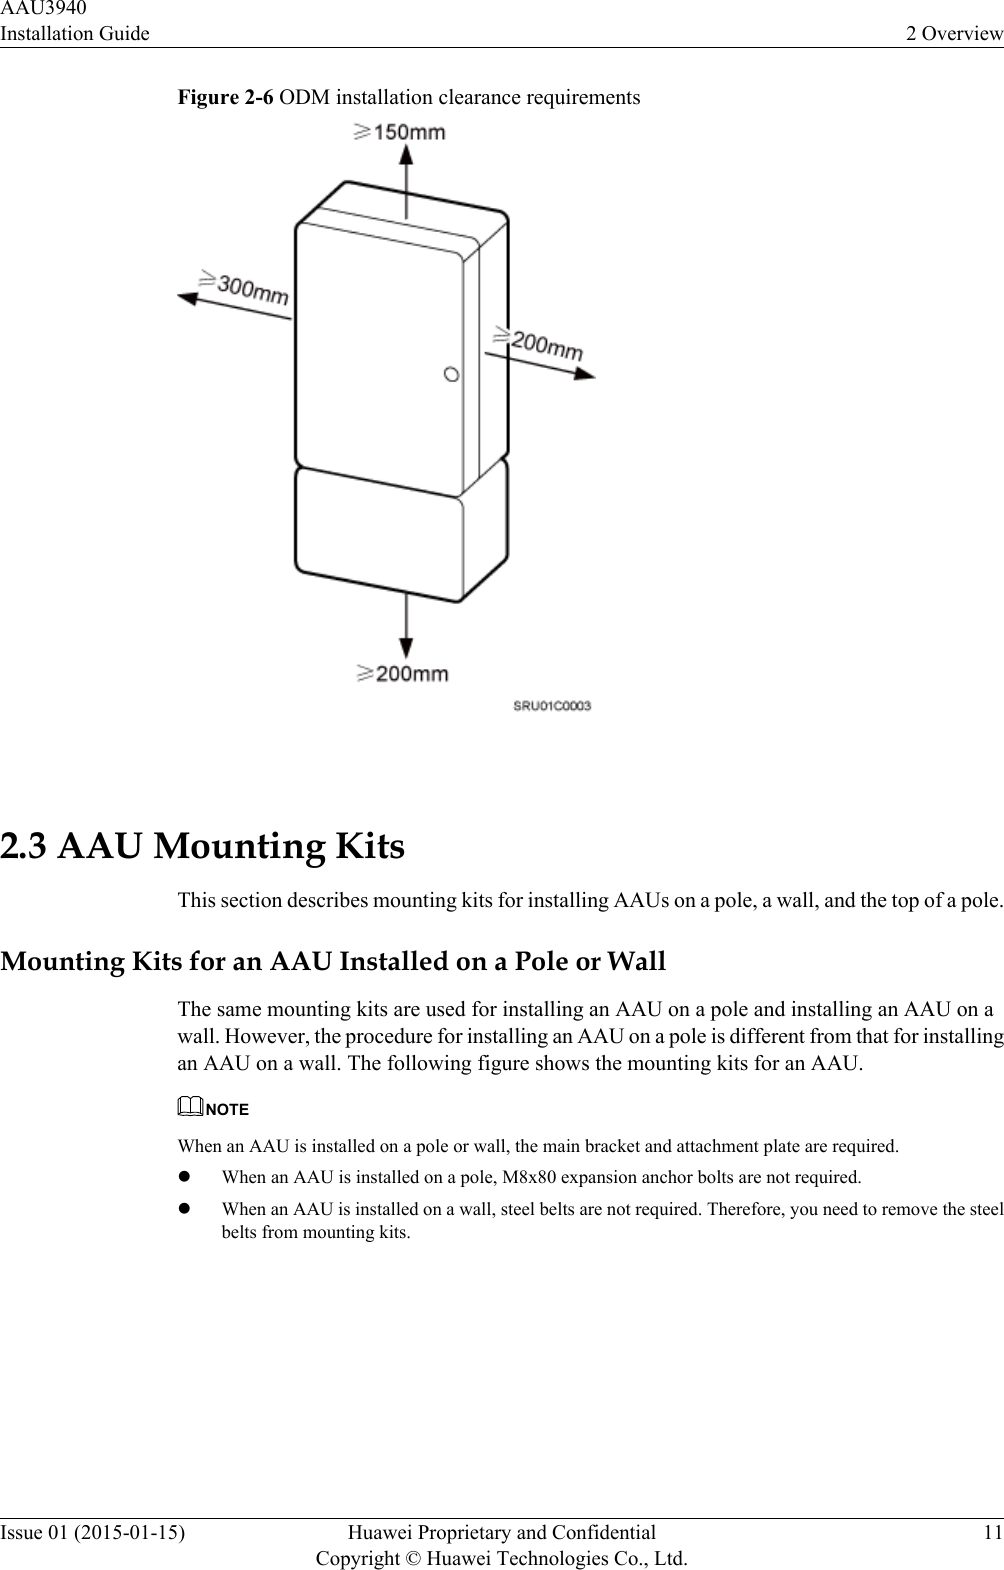 Figure 2-6 ODM installation clearance requirements 2.3 AAU Mounting KitsThis section describes mounting kits for installing AAUs on a pole, a wall, and the top of a pole.Mounting Kits for an AAU Installed on a Pole or WallThe same mounting kits are used for installing an AAU on a pole and installing an AAU on awall. However, the procedure for installing an AAU on a pole is different from that for installingan AAU on a wall. The following figure shows the mounting kits for an AAU.NOTEWhen an AAU is installed on a pole or wall, the main bracket and attachment plate are required.lWhen an AAU is installed on a pole, M8x80 expansion anchor bolts are not required.lWhen an AAU is installed on a wall, steel belts are not required. Therefore, you need to remove the steelbelts from mounting kits.AAU3940Installation Guide 2 OverviewIssue 01 (2015-01-15) Huawei Proprietary and ConfidentialCopyright © Huawei Technologies Co., Ltd.11